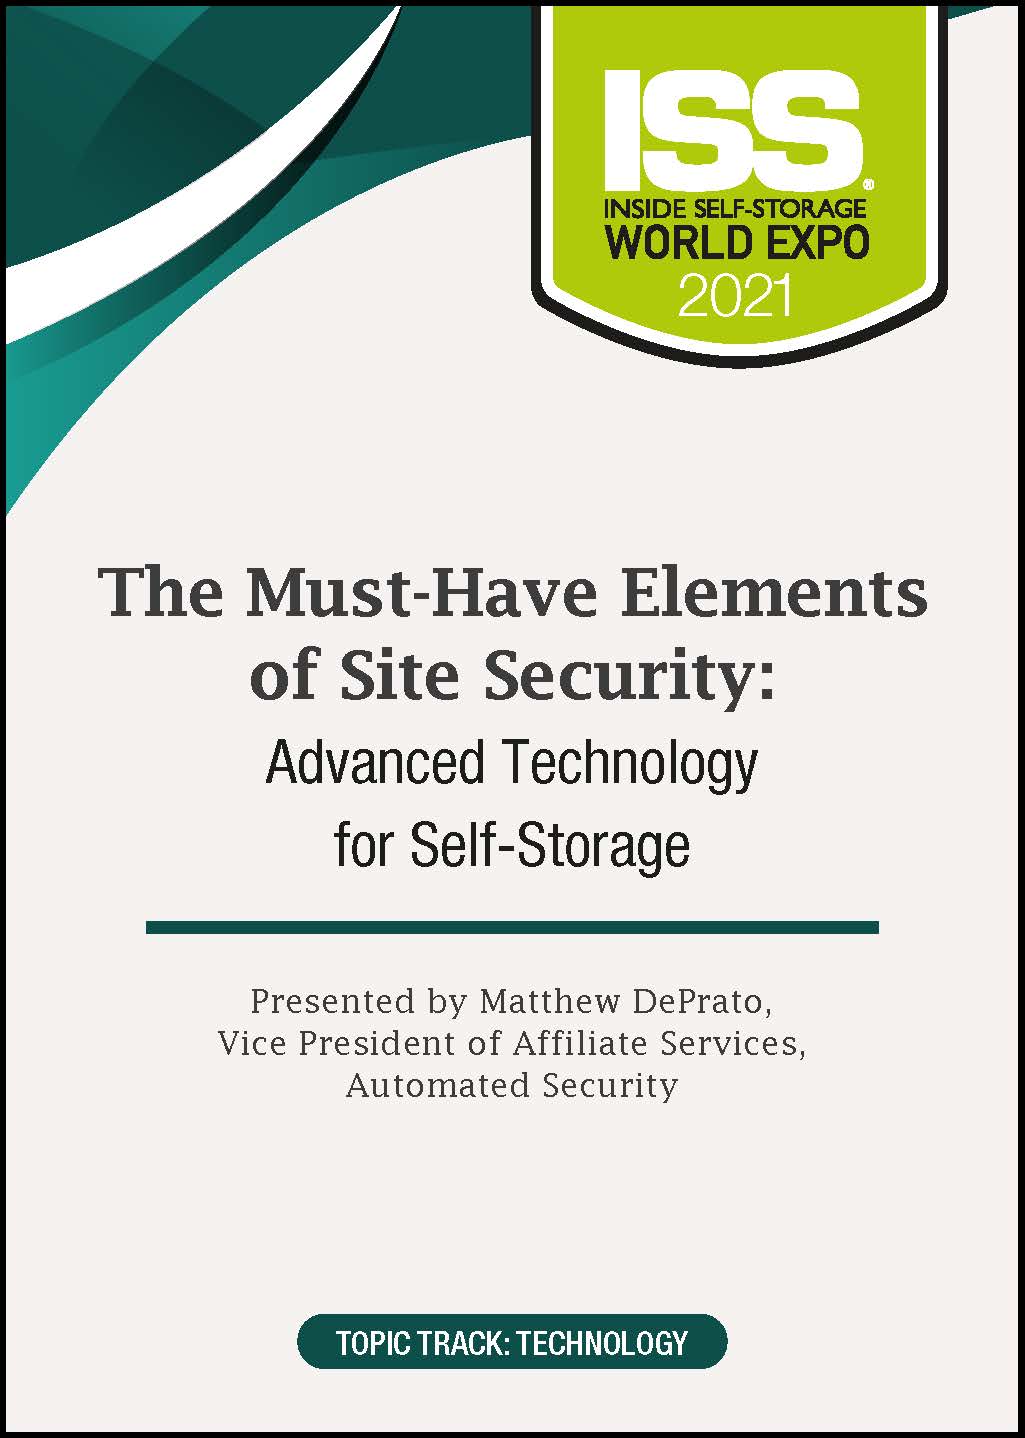 The Must-Have Elements of Site Security: Advanced Technology for Self-Storage